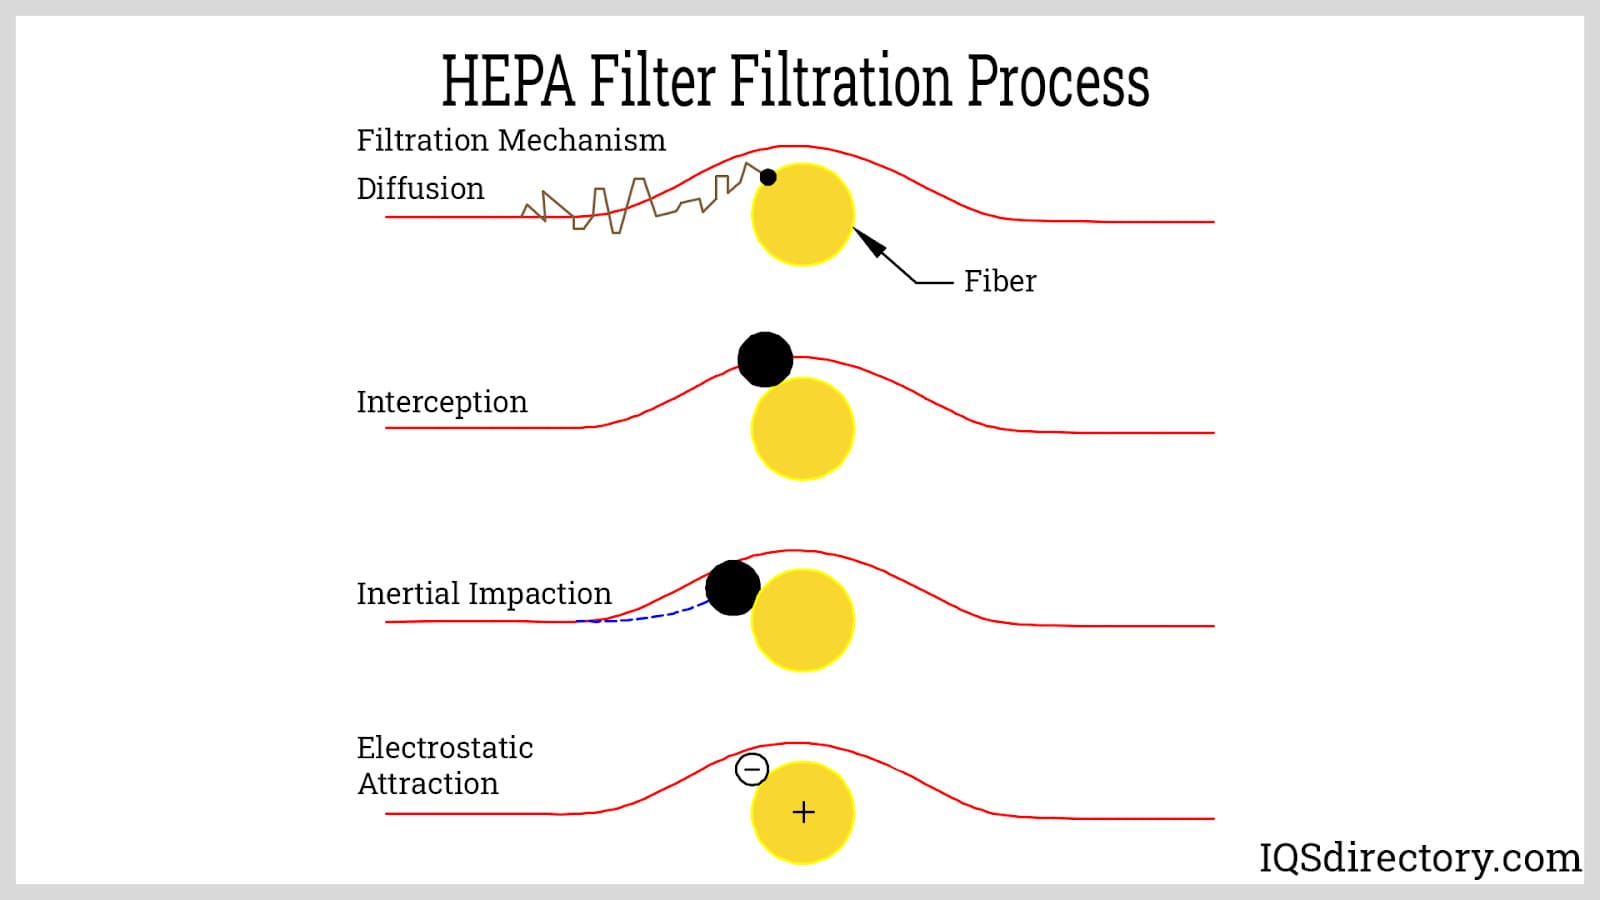 What Are HEPA Filters And How Do They Work?